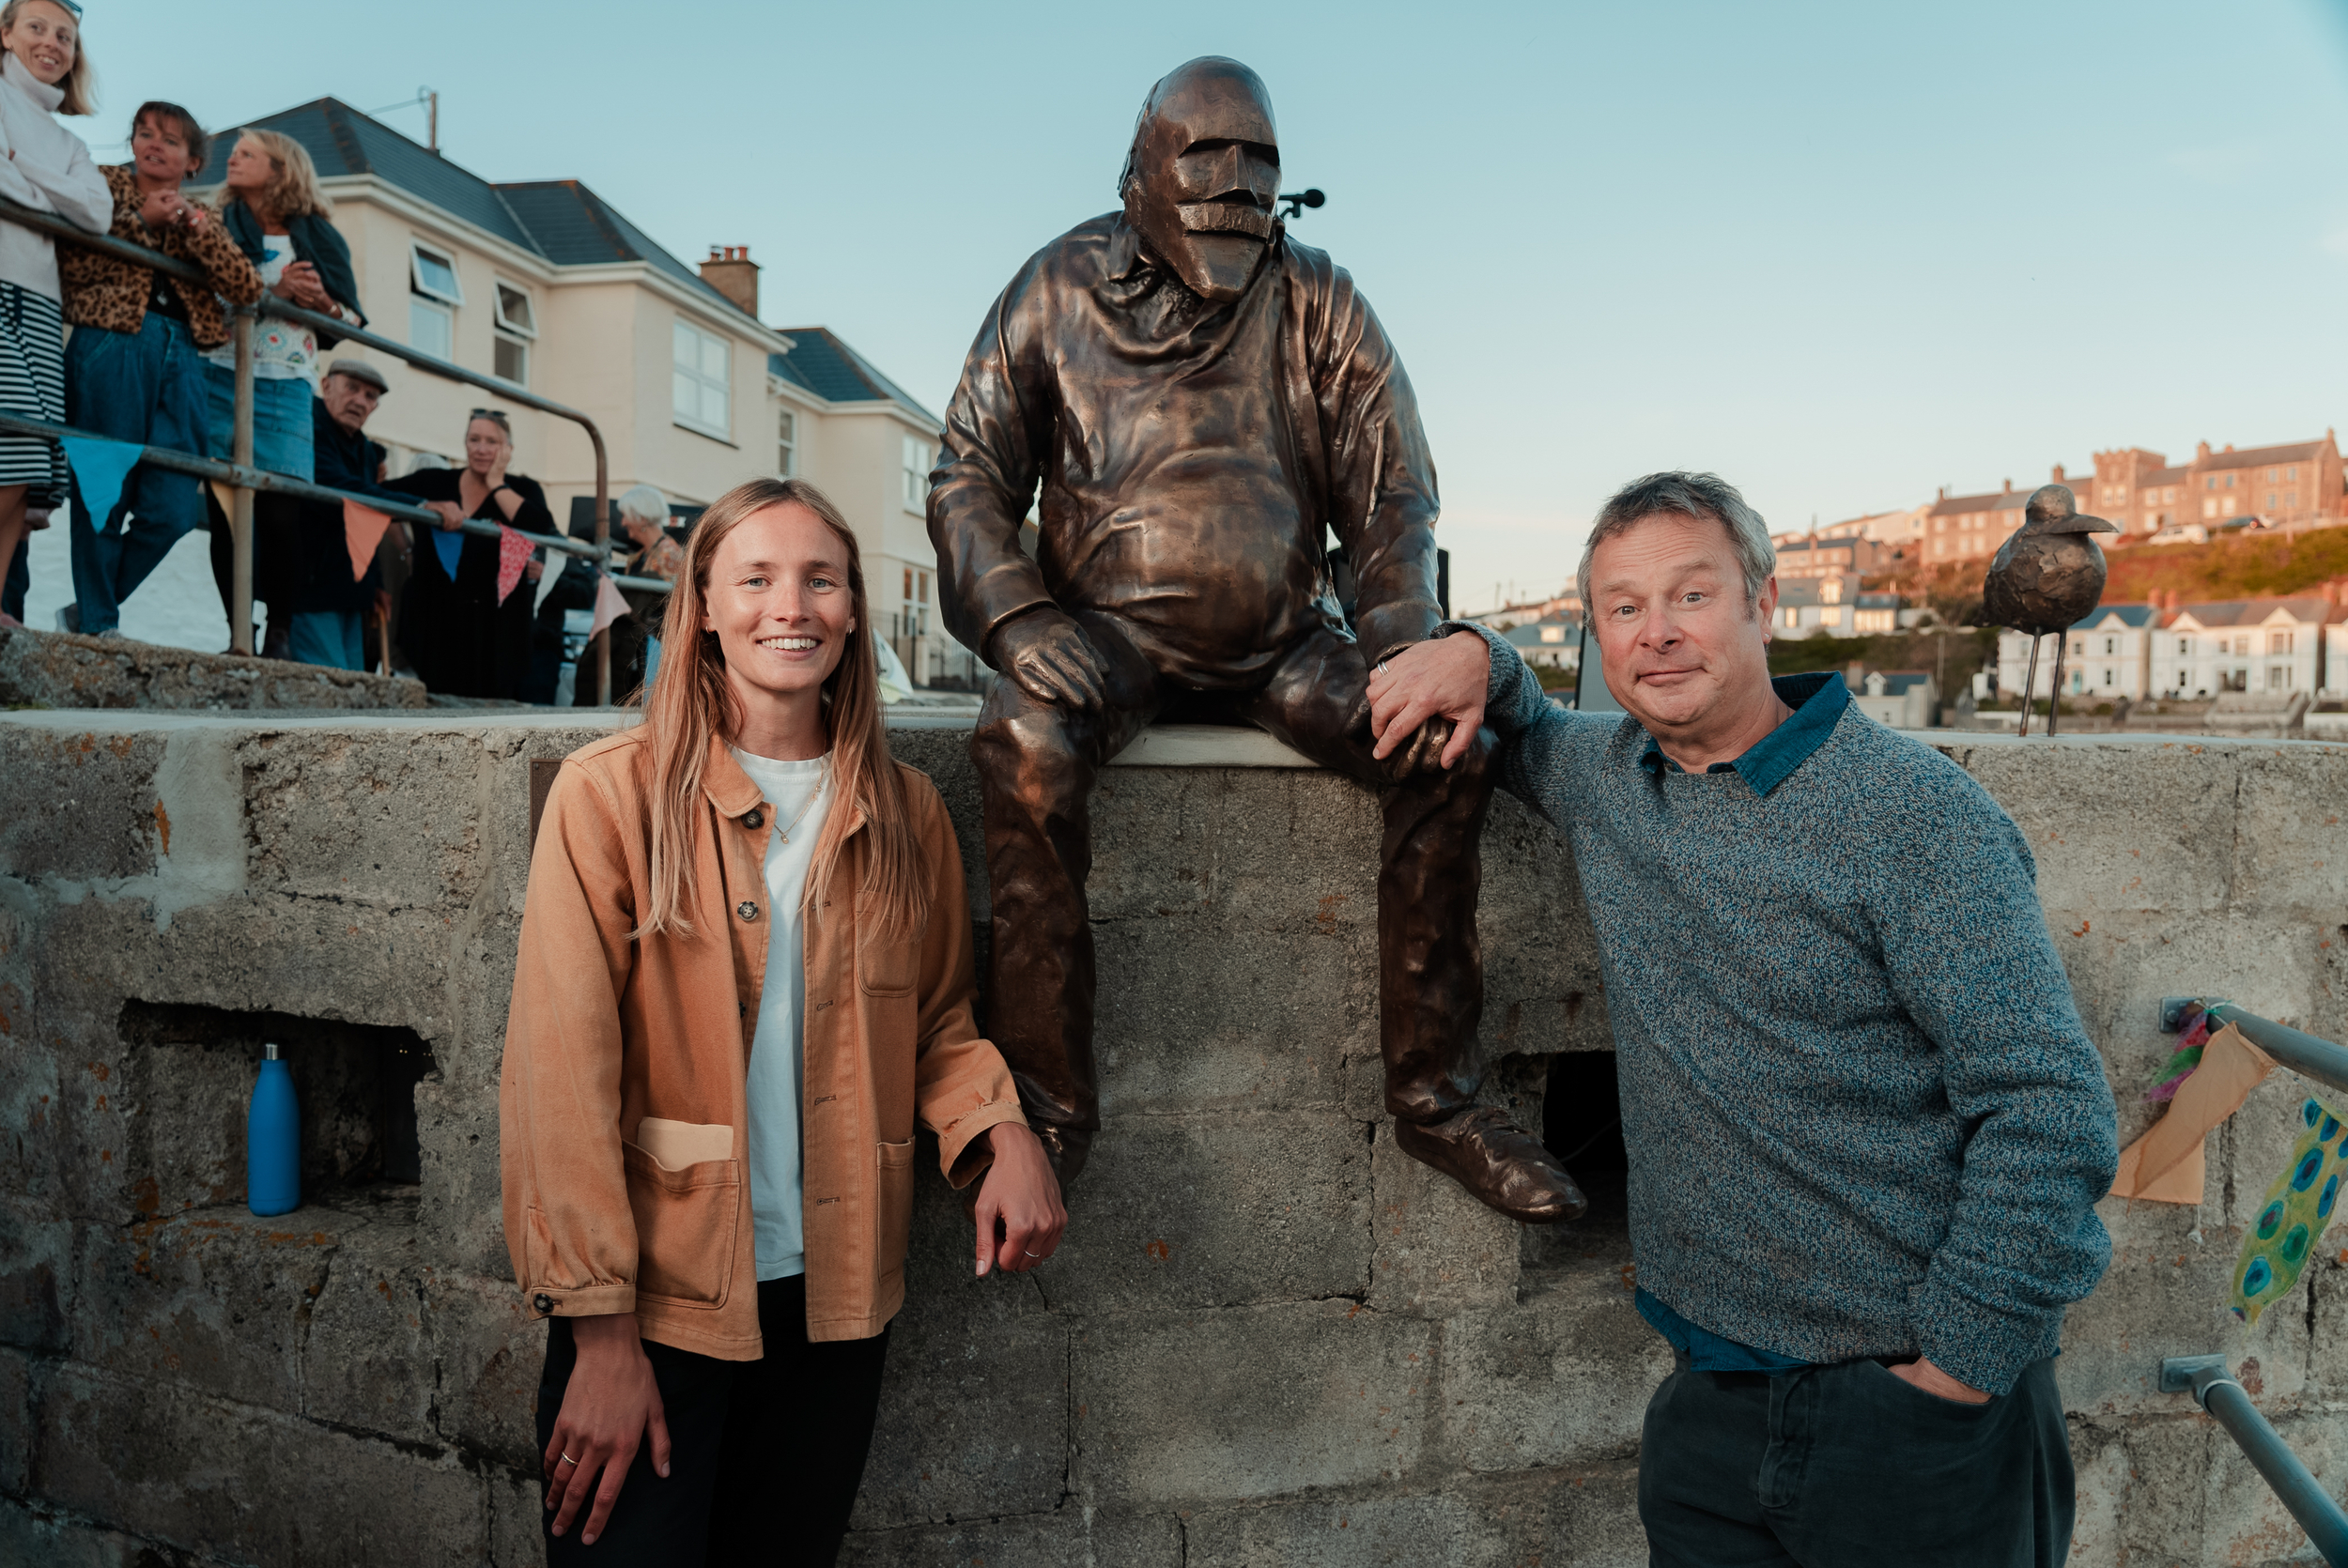 Holly and Hugh pose with a bronze-coloured sculpture of a man sitting with his legs hanging over the edge of a concrete surface. The sculpture hunches slightly forwards and squints into the distance.